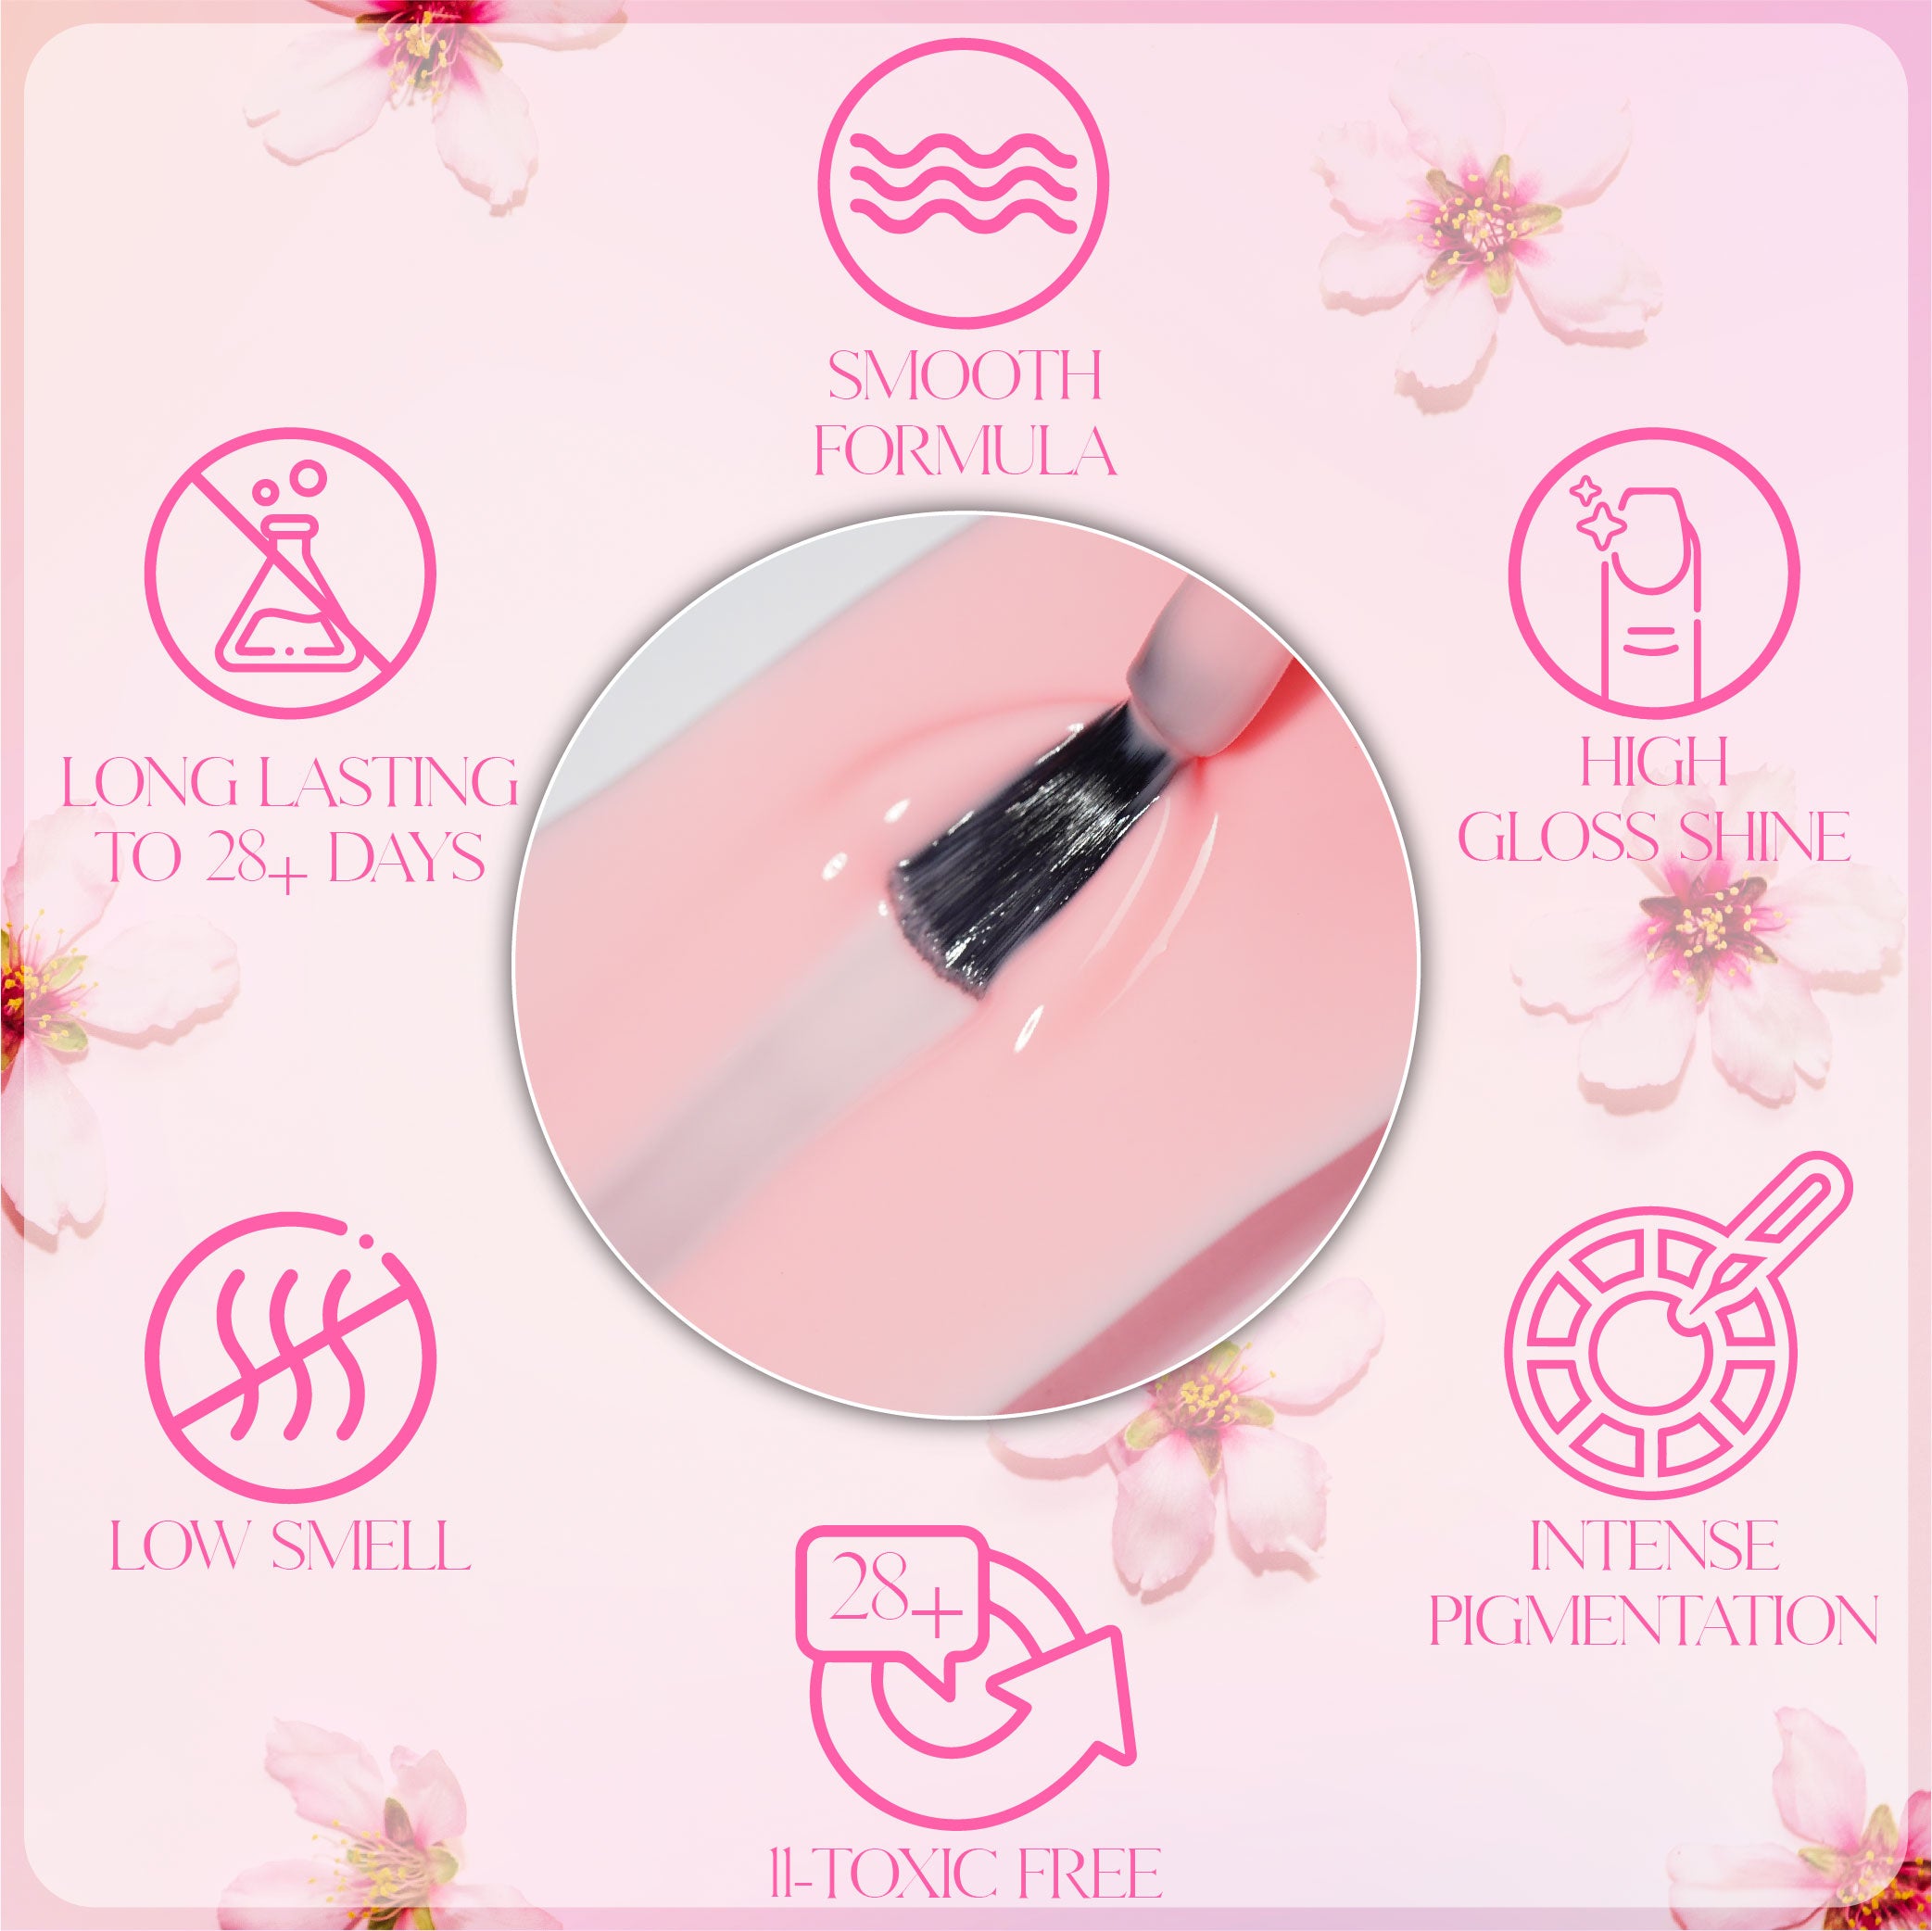 LDS BP - 04 - Blossom Pink Collection